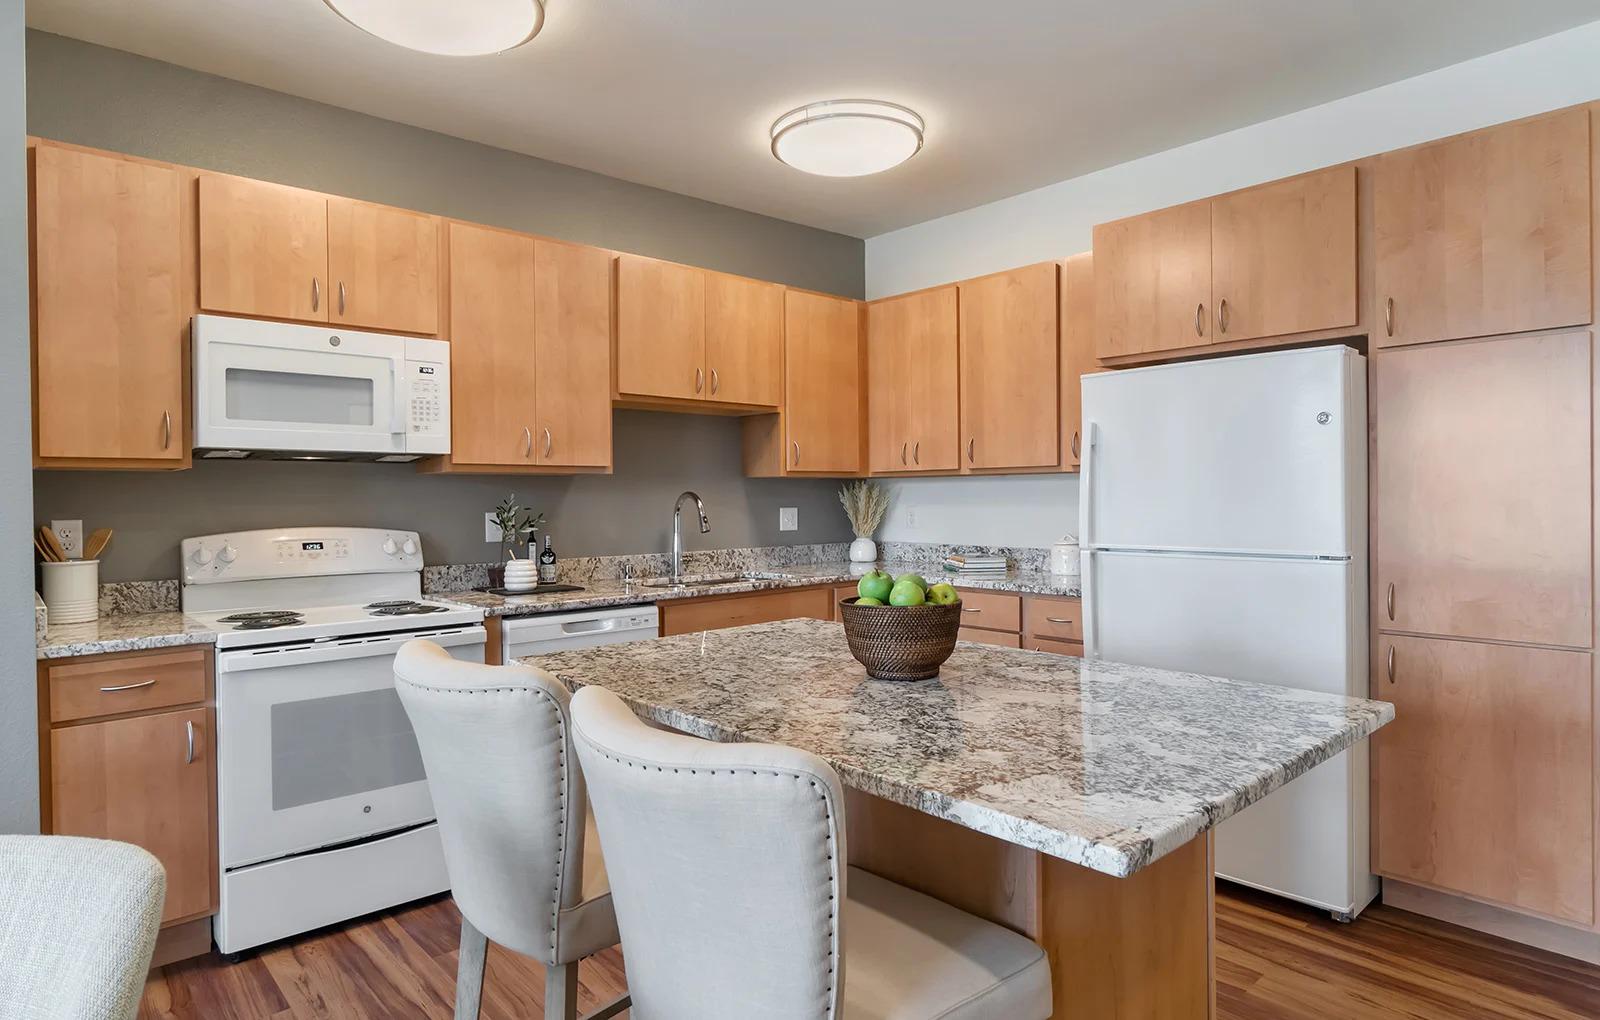 Kitchen with Eat-in Island at Oaks Landing 55+ Apartments